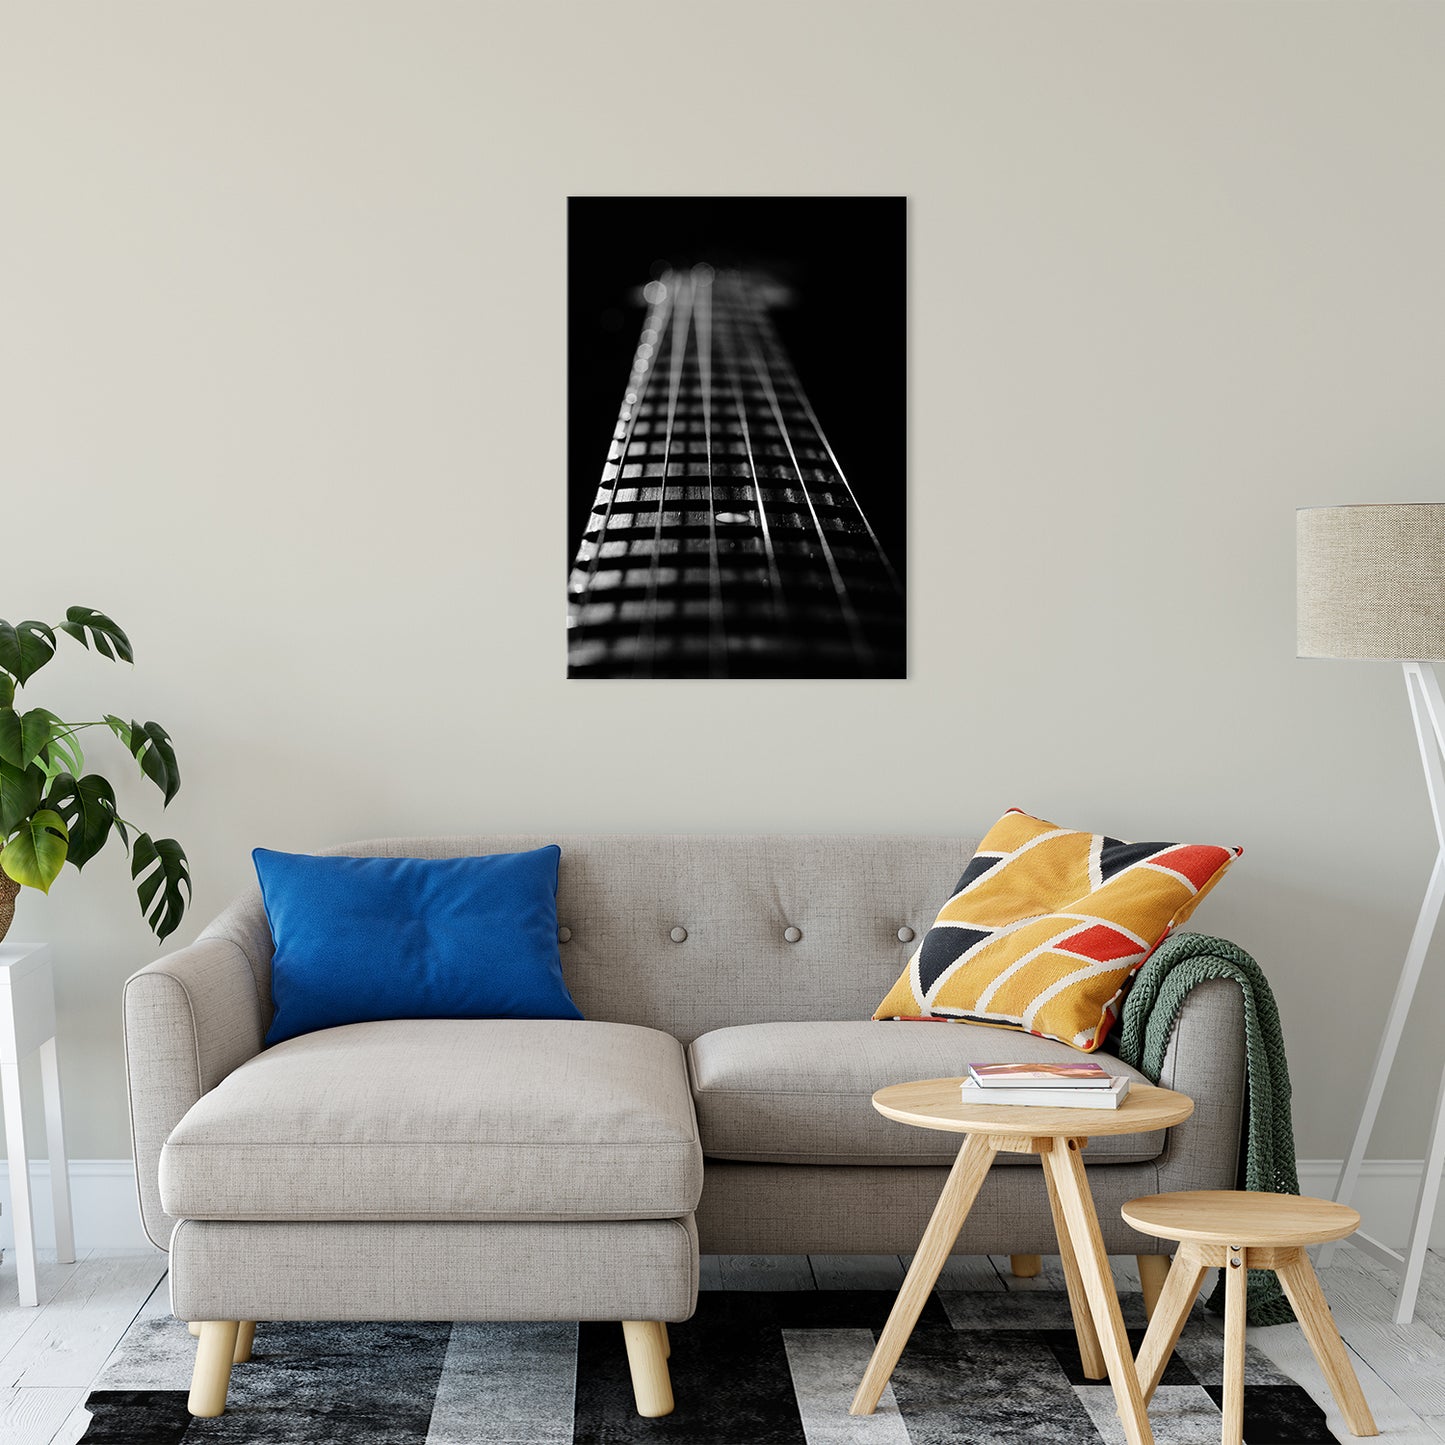 Frets and Cords Black and White Abstract Photo Fine Art Canvas & Unframed Wall Art Prints 24" x 36" / Fine Art Canvas - PIPAFINEART